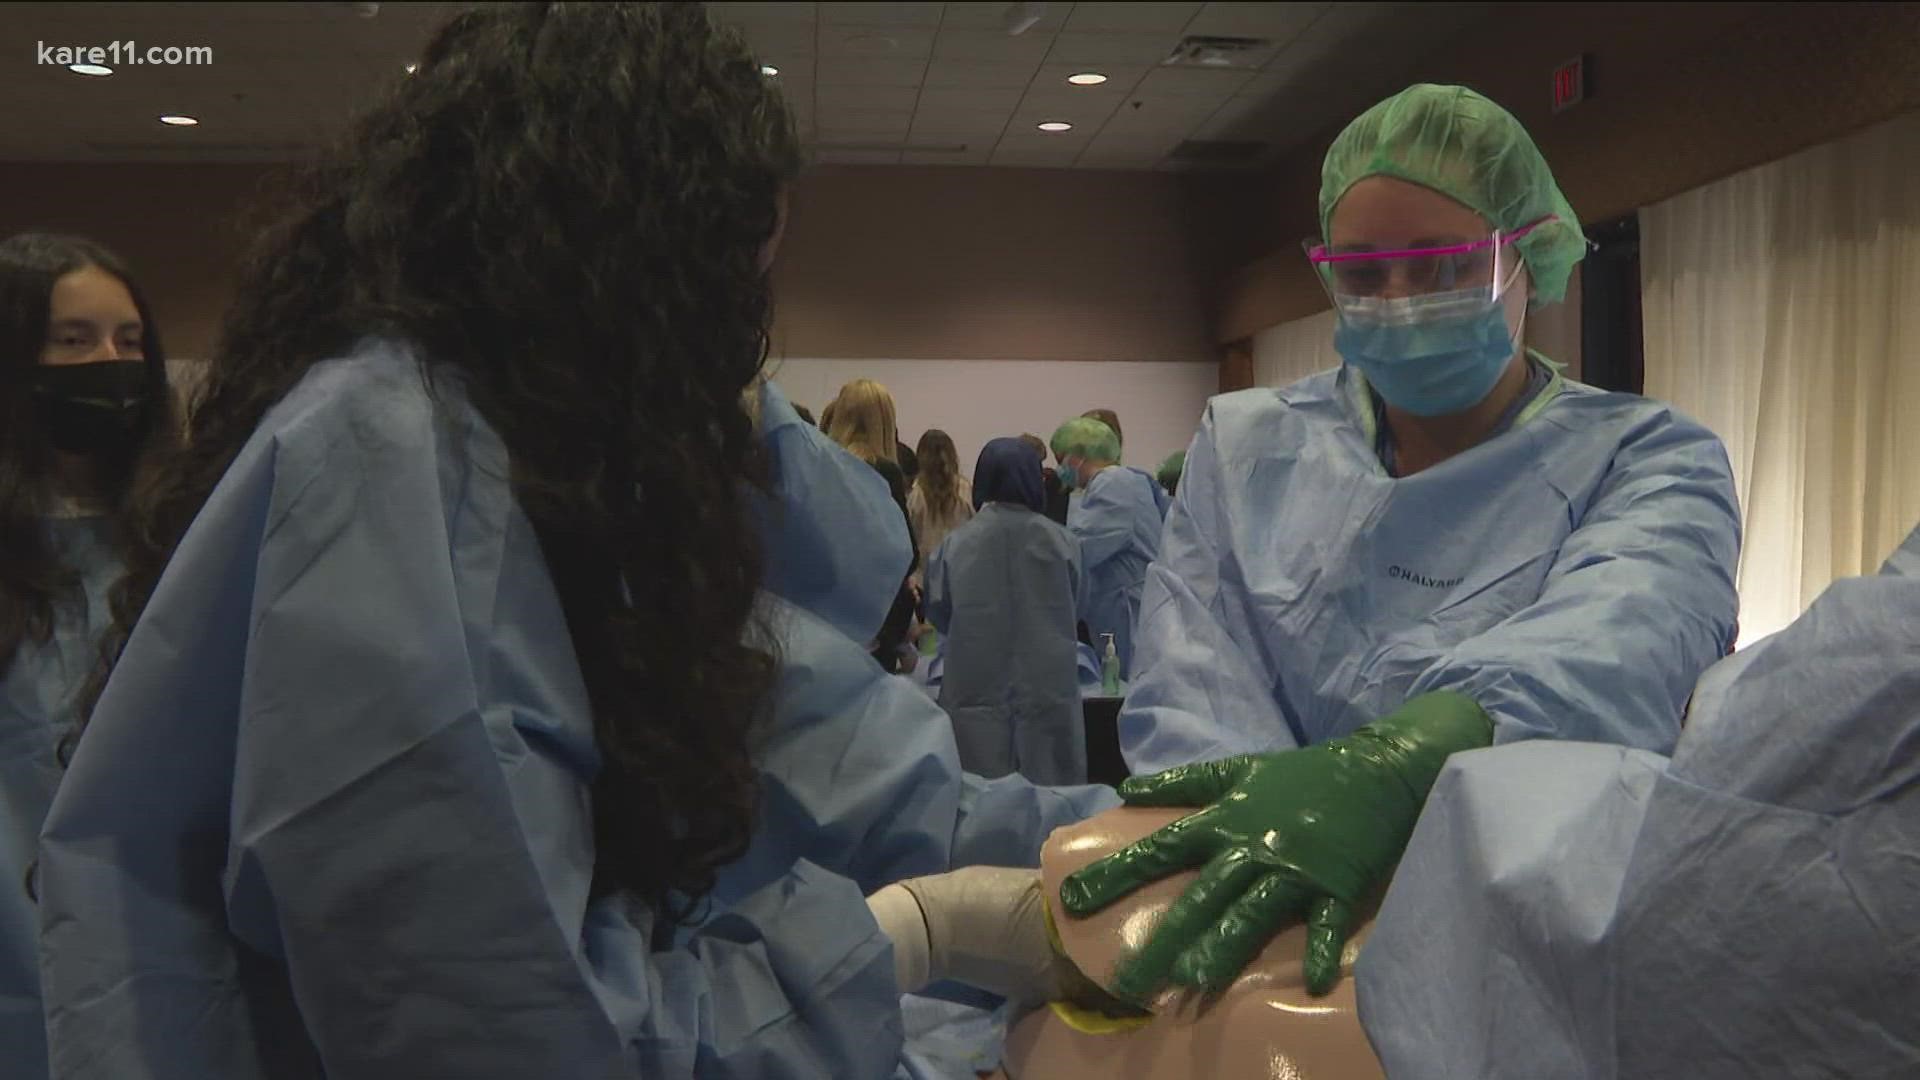 Minnesota HOSA works with students from junior high all the way through college to help them enter the medical field.